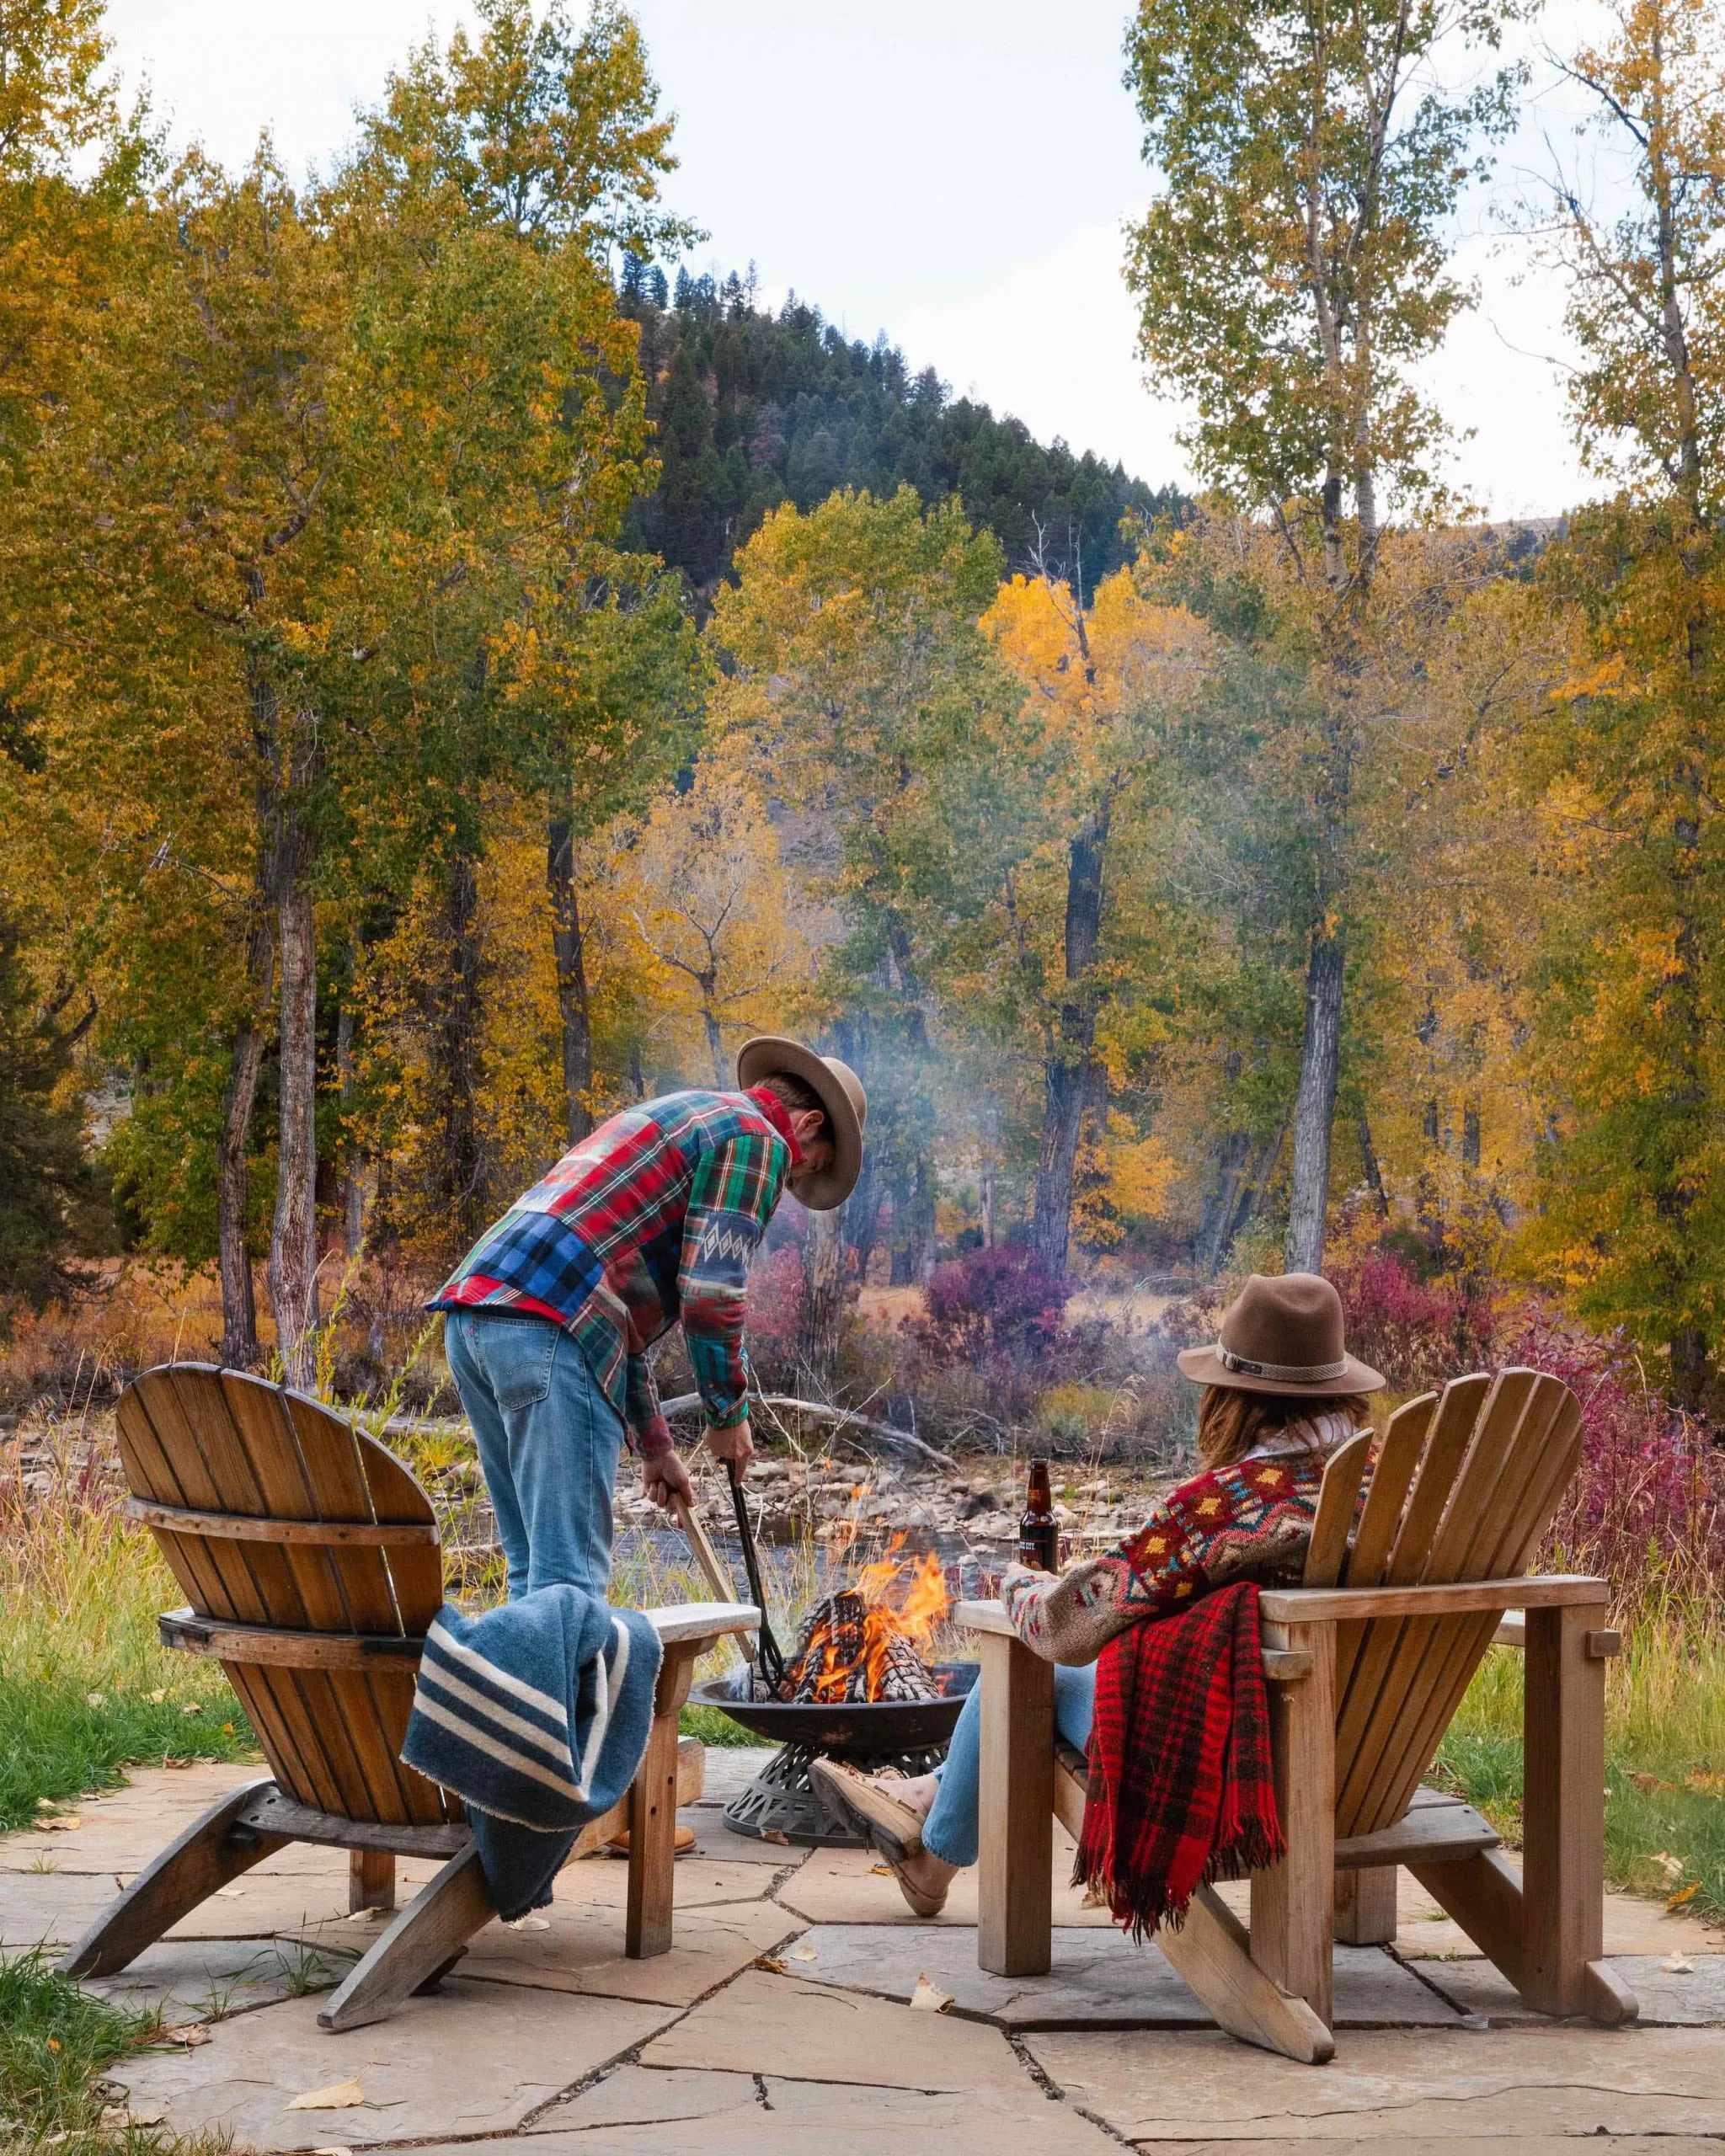 A woman sitting in a wooden chair holding a beer while a man tends to a fire pit